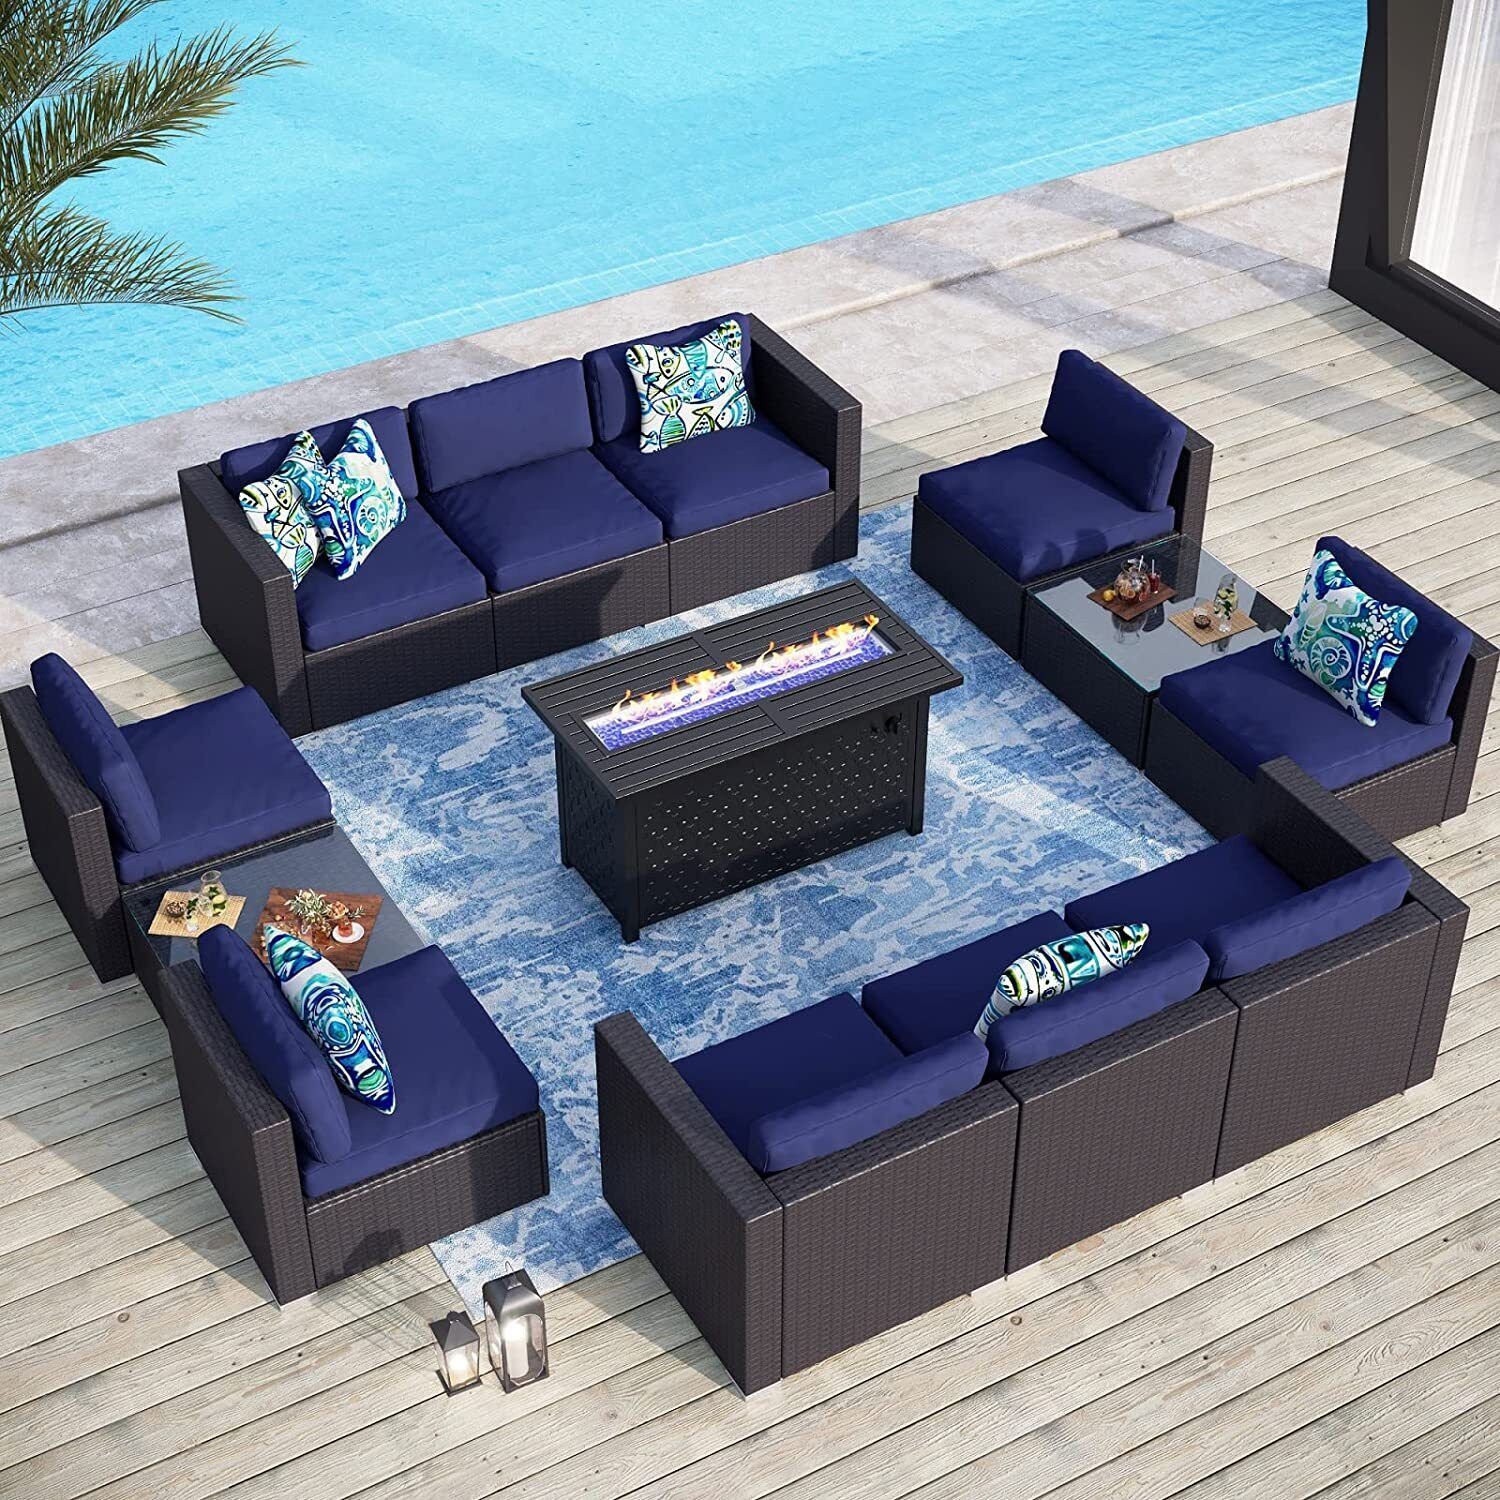 13 Piece Rattan Furniture Set W/ Fire Pit Table Patio Wicker Sectional Sofa  Set | Ebay For Fire Pit Table Wicker Sectional Sofa Set (Photo 15 of 15)